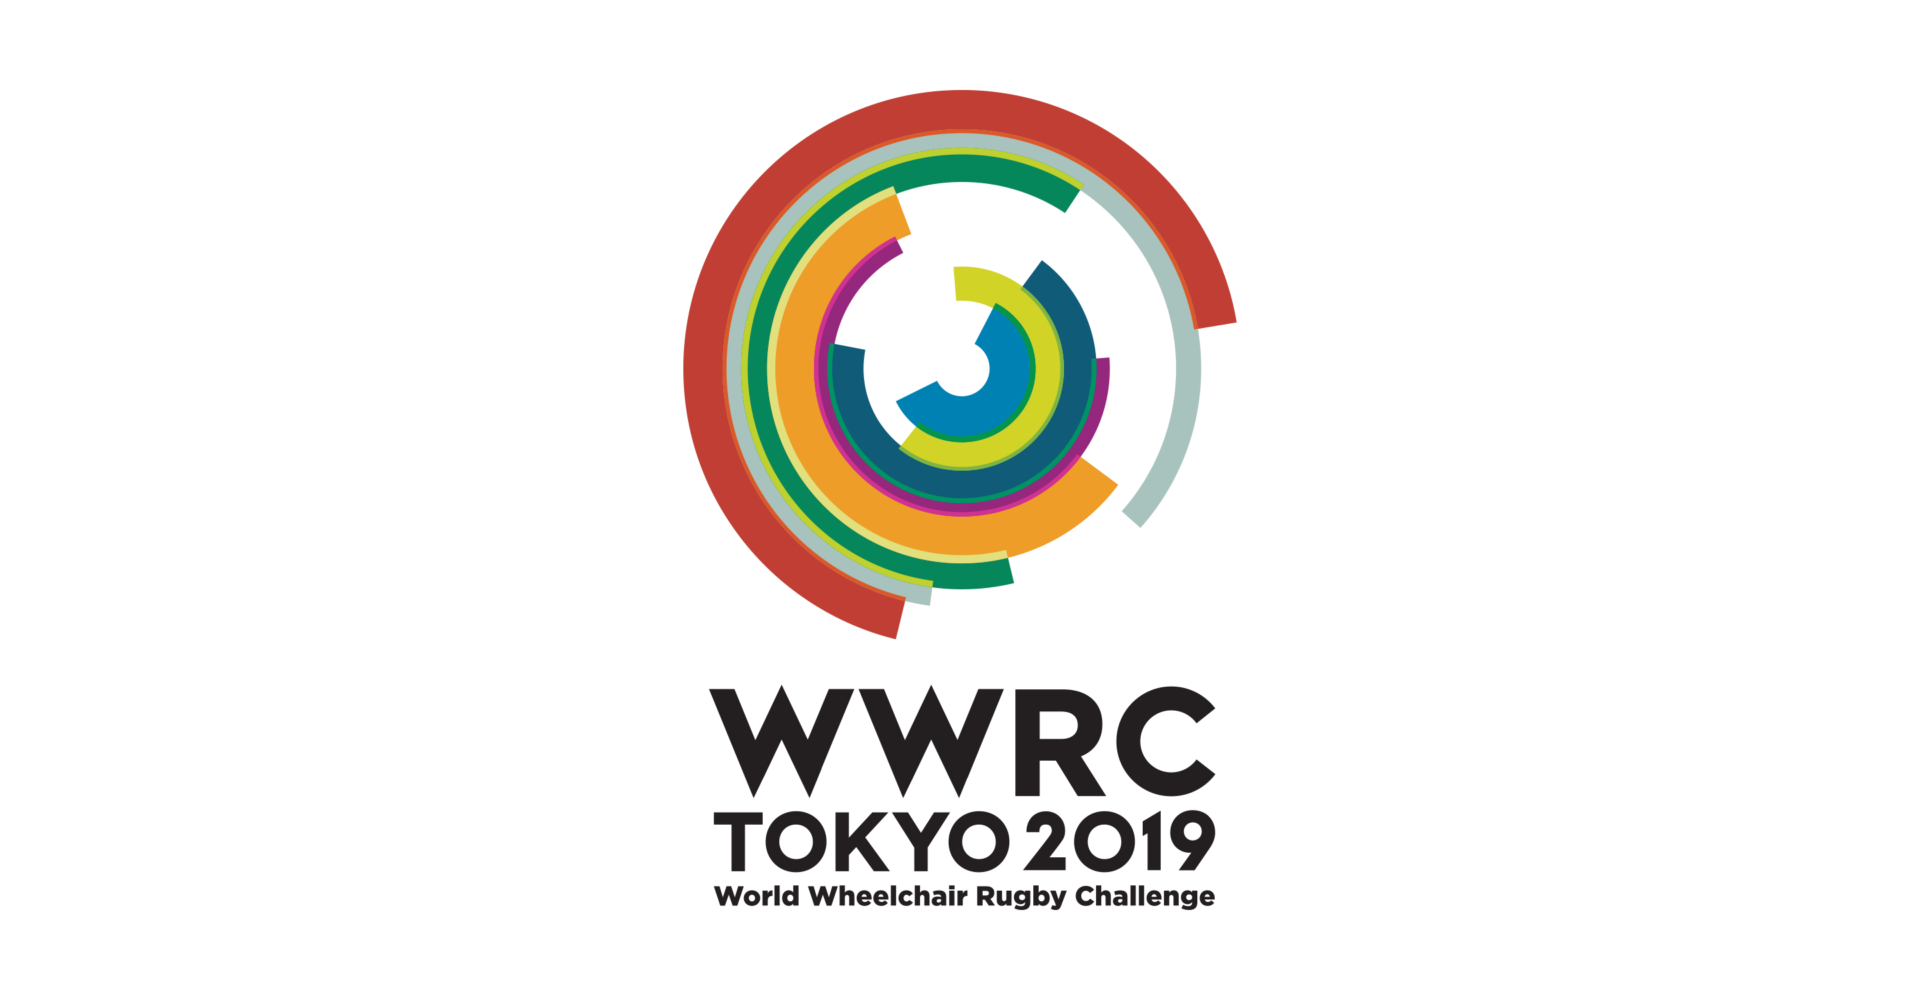 CANADA TO PLAY IN POOL B AT THE WORLD WHEELCHAIR RUGBY CHALLENGE 2019